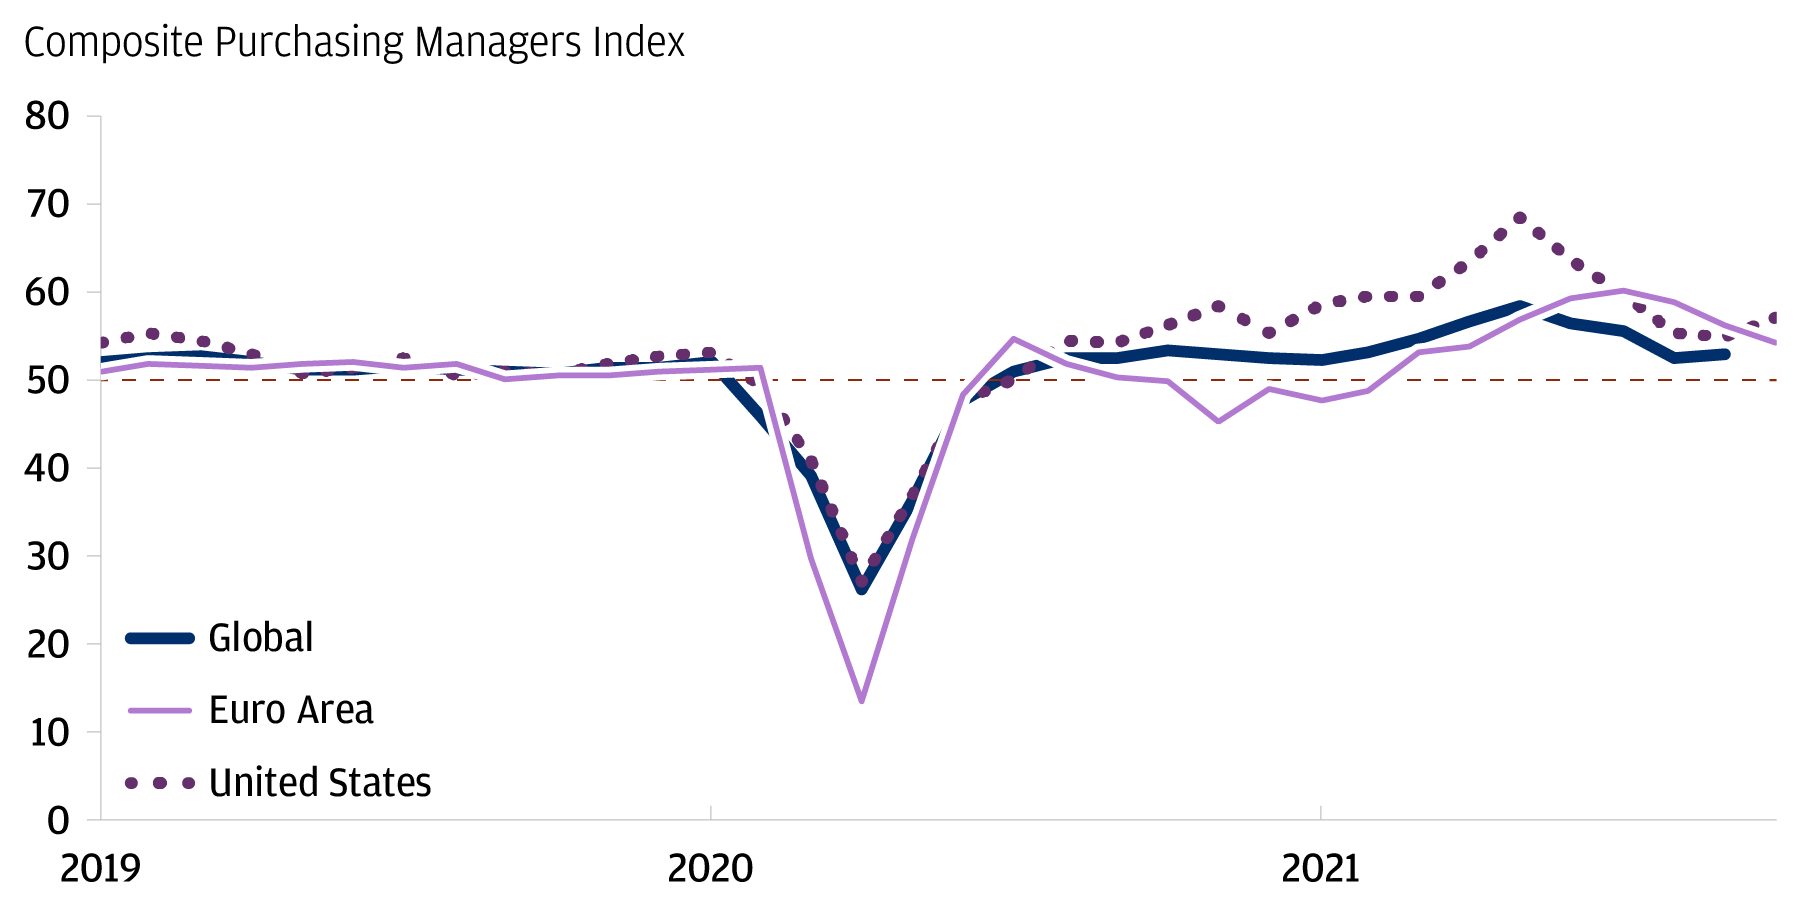 Global growth has decelerated recently, but remains resilient per the Composite Purchasing Managers Index 